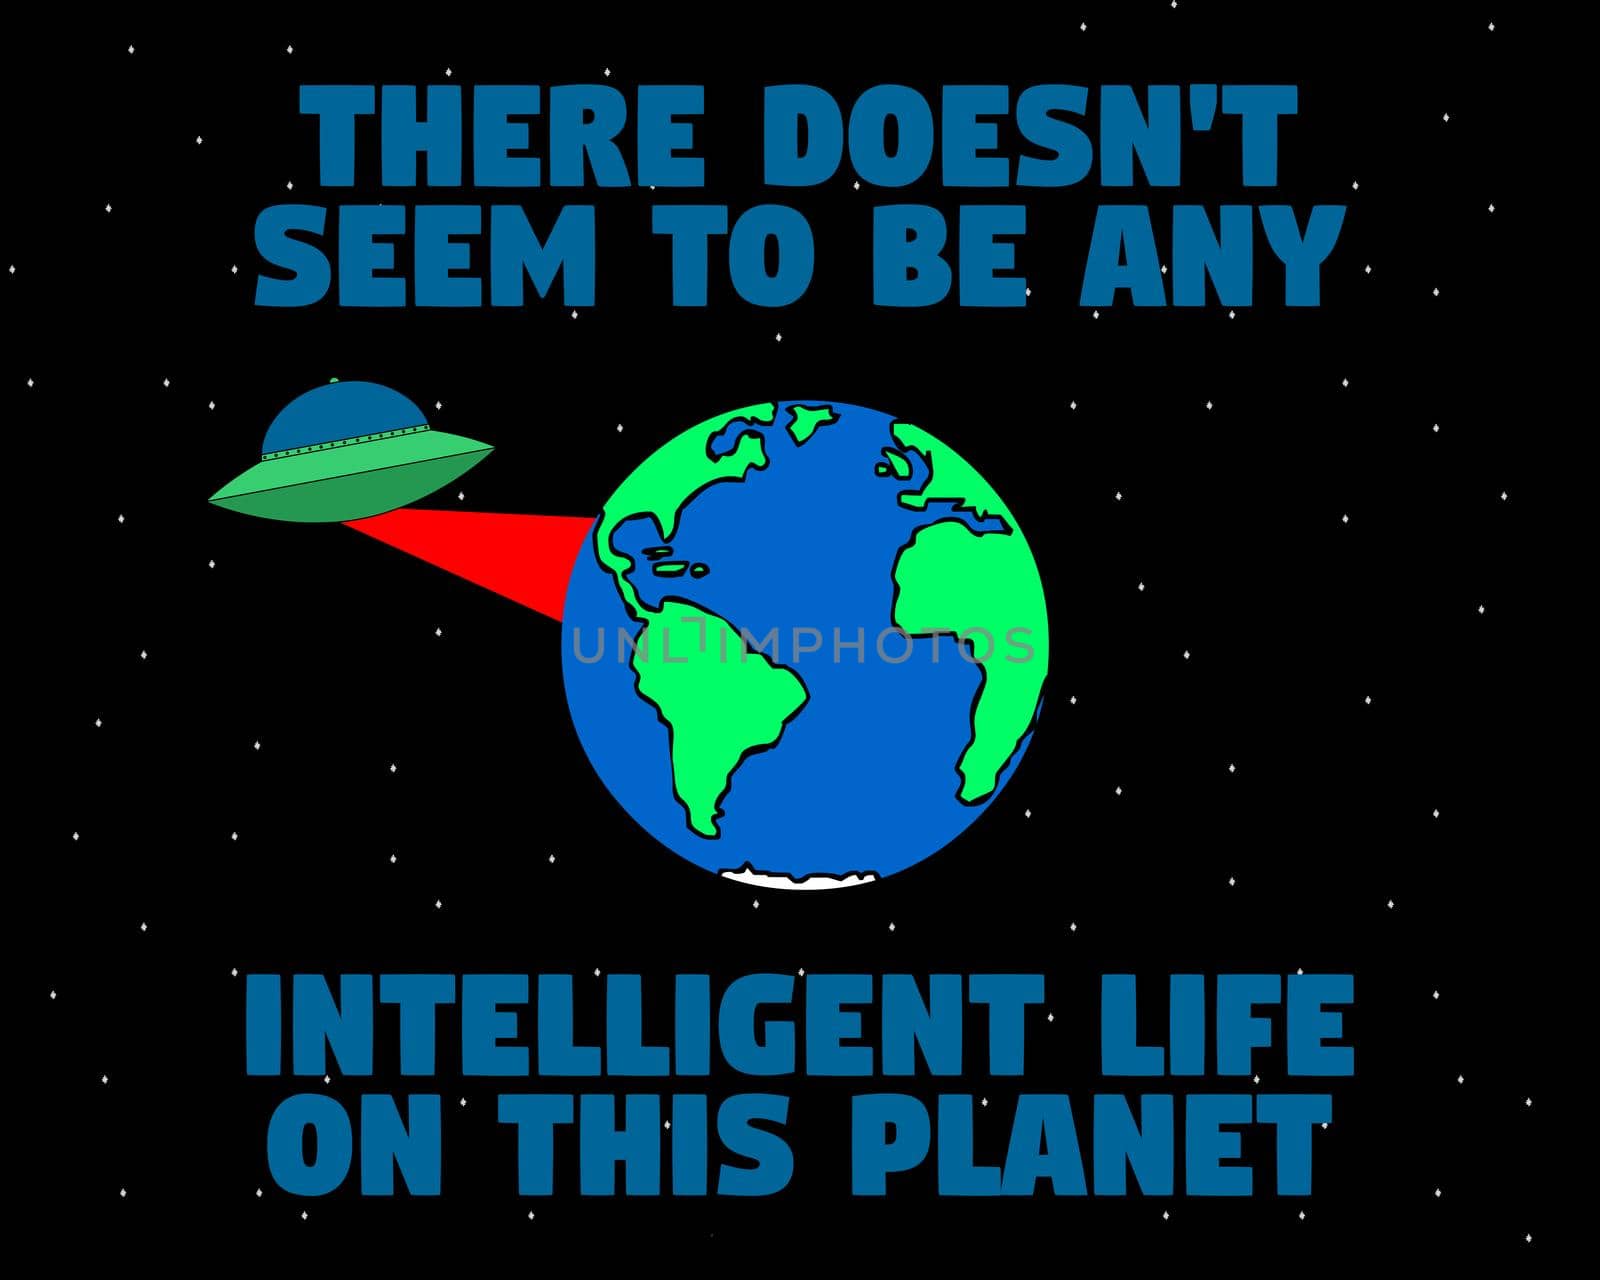 No intelligent life on this planet